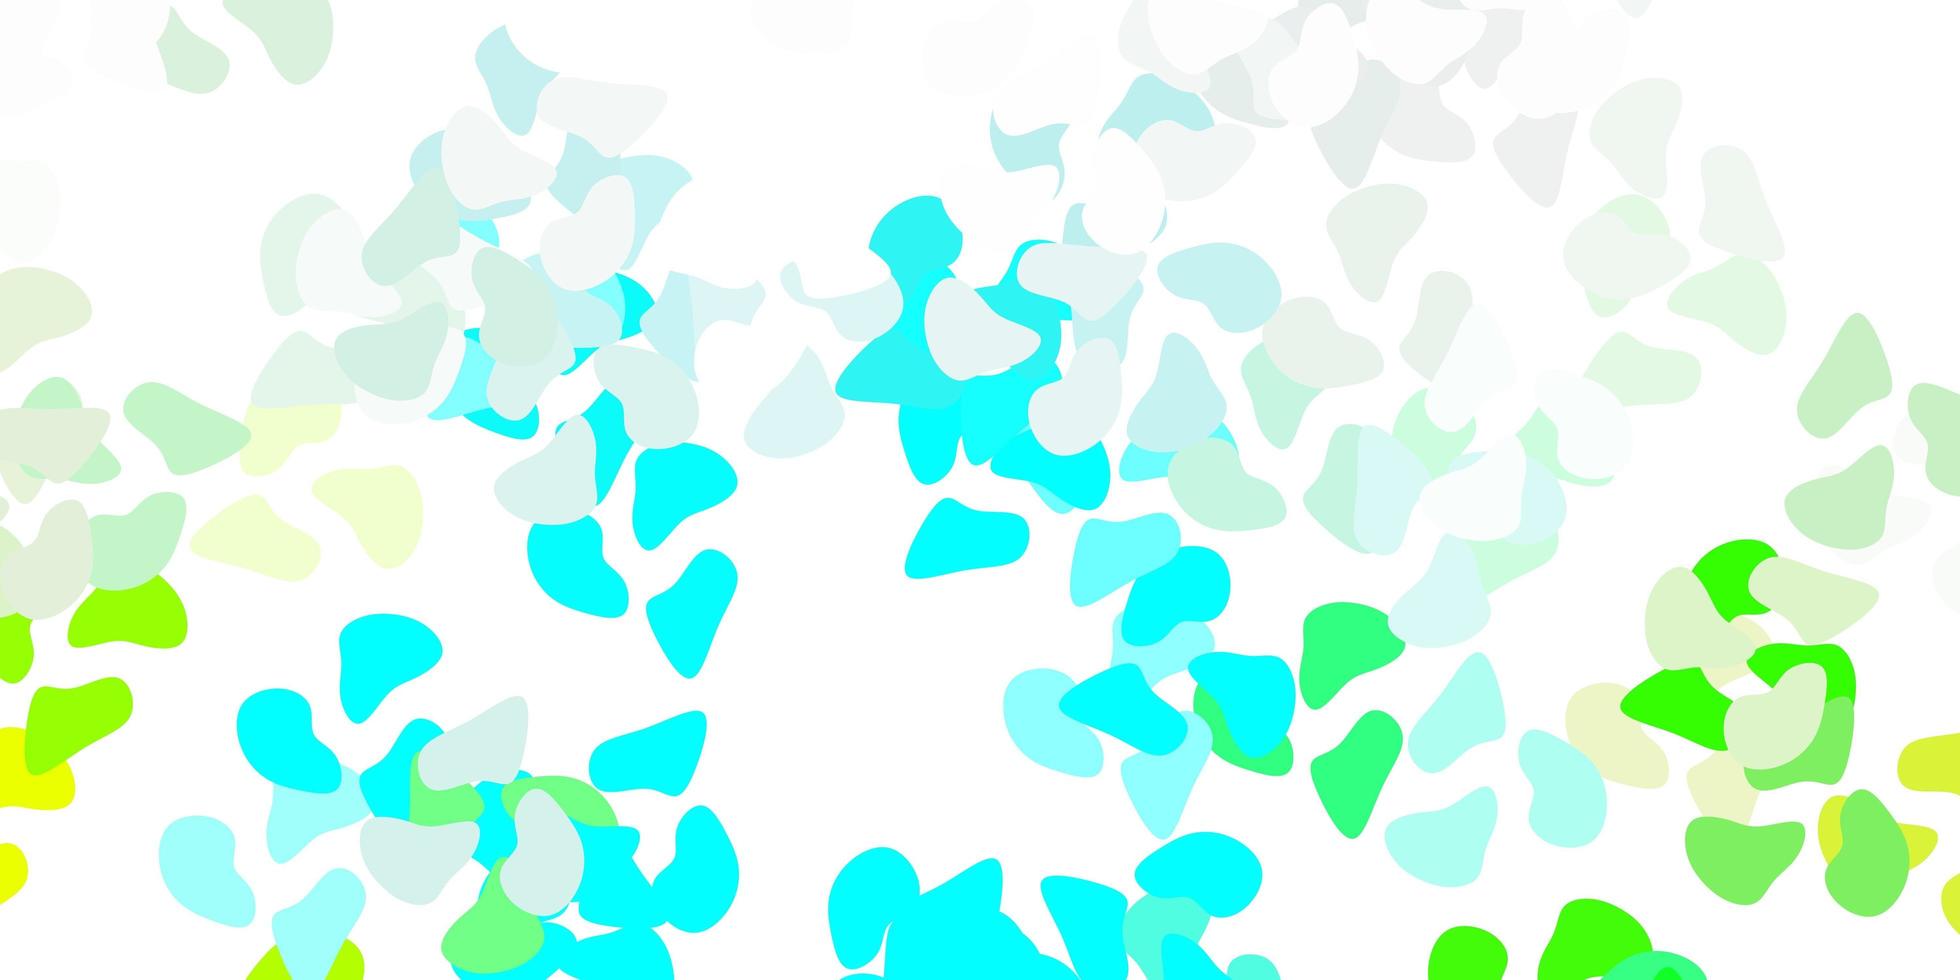 Light blue, green vector pattern with abstract shapes.